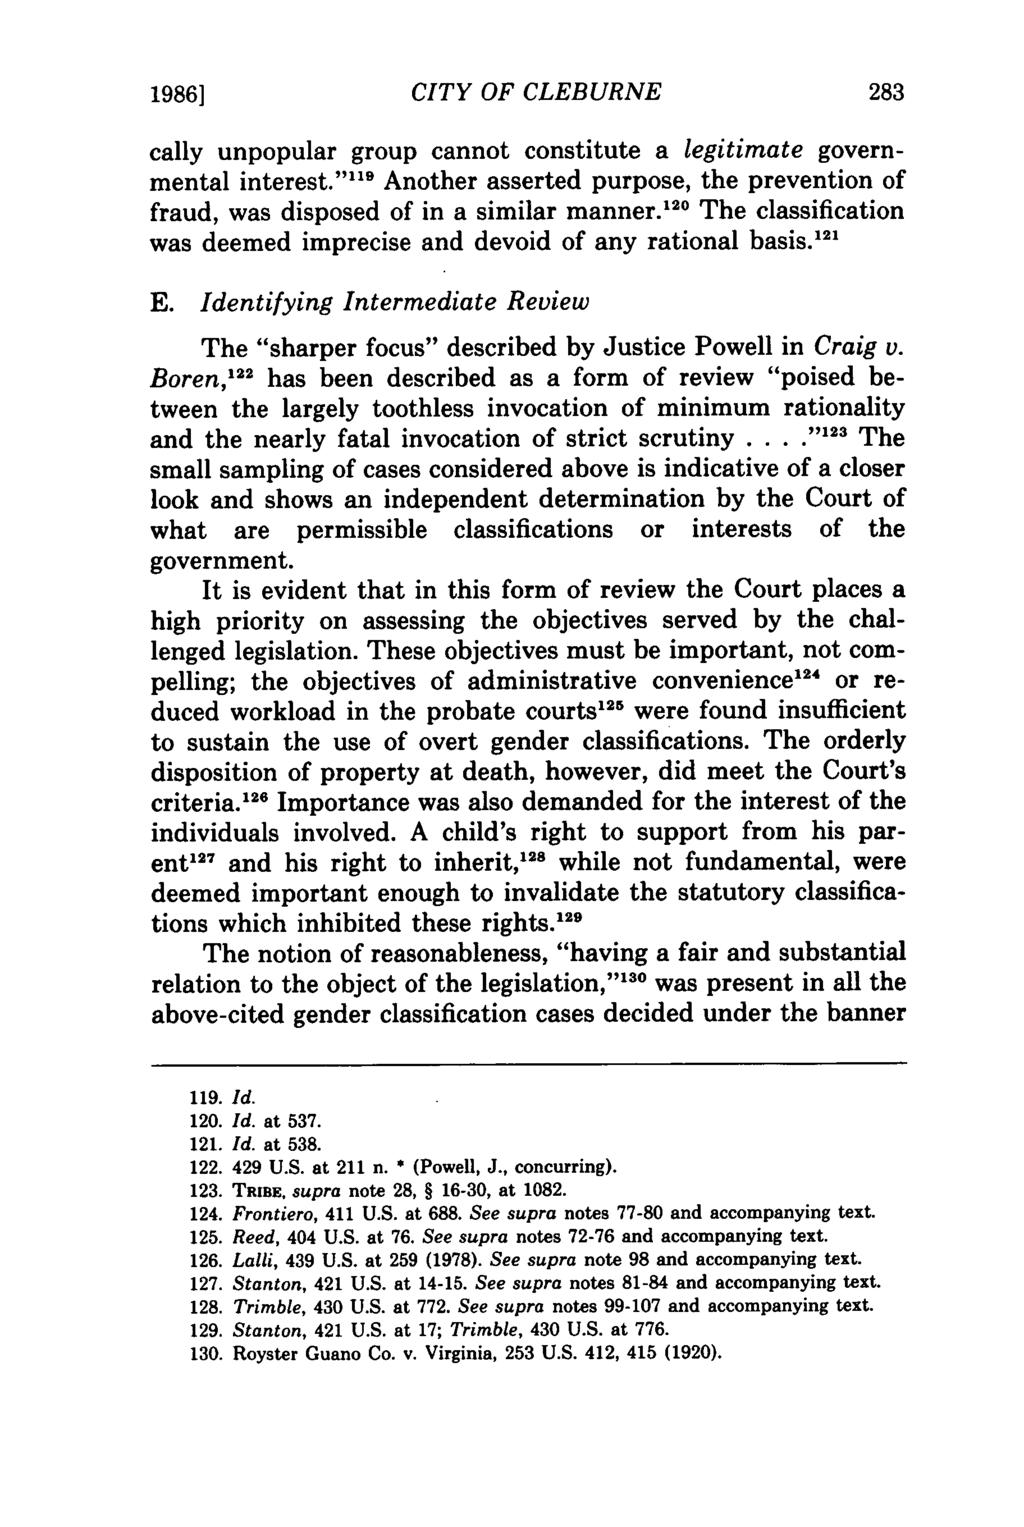 1986] CITY OF CLEBURNE cally unpopular group cannot constitute a legitimate governmental interest."" 9 Another asserted purpose, the prevention of fraud, was disposed of in a similar manner.